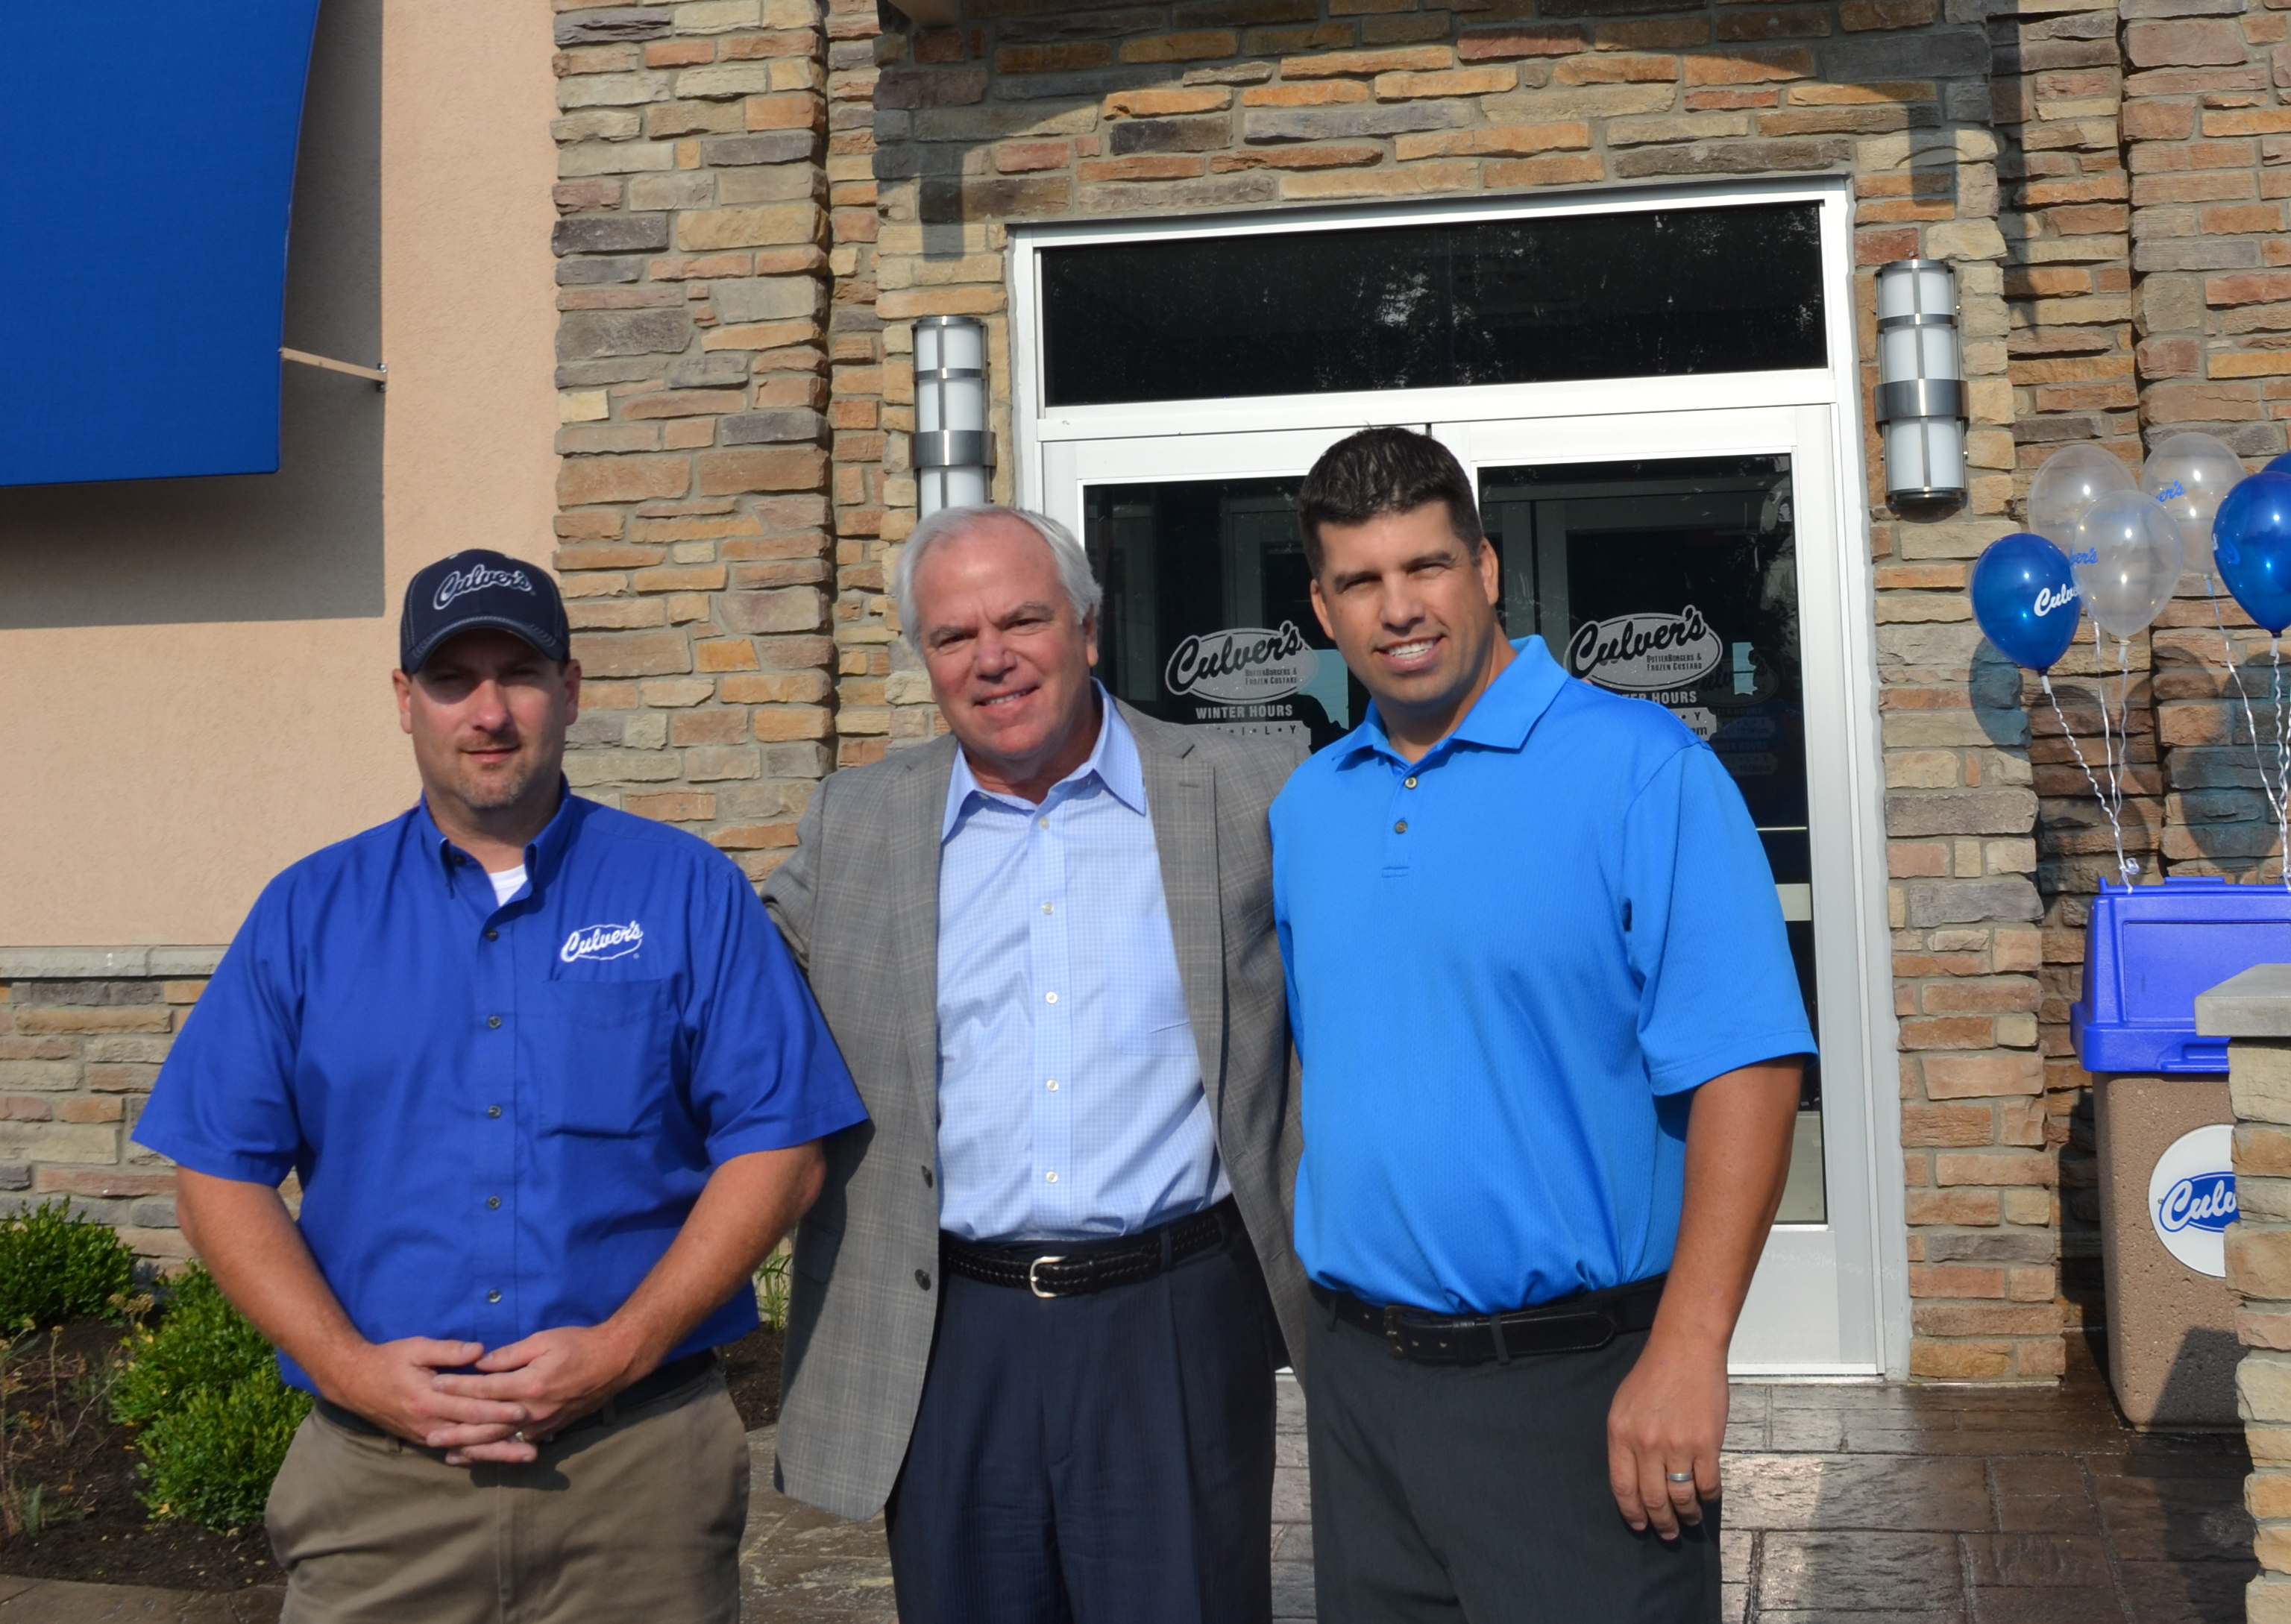 Craig Culver, (center) founder and CEO of Culvers with Neil Miller (left) and Jeff Meyer, co-owners of the new location on Olio Road in Fishers. (Photo by Ann Craig-Cinnamon)